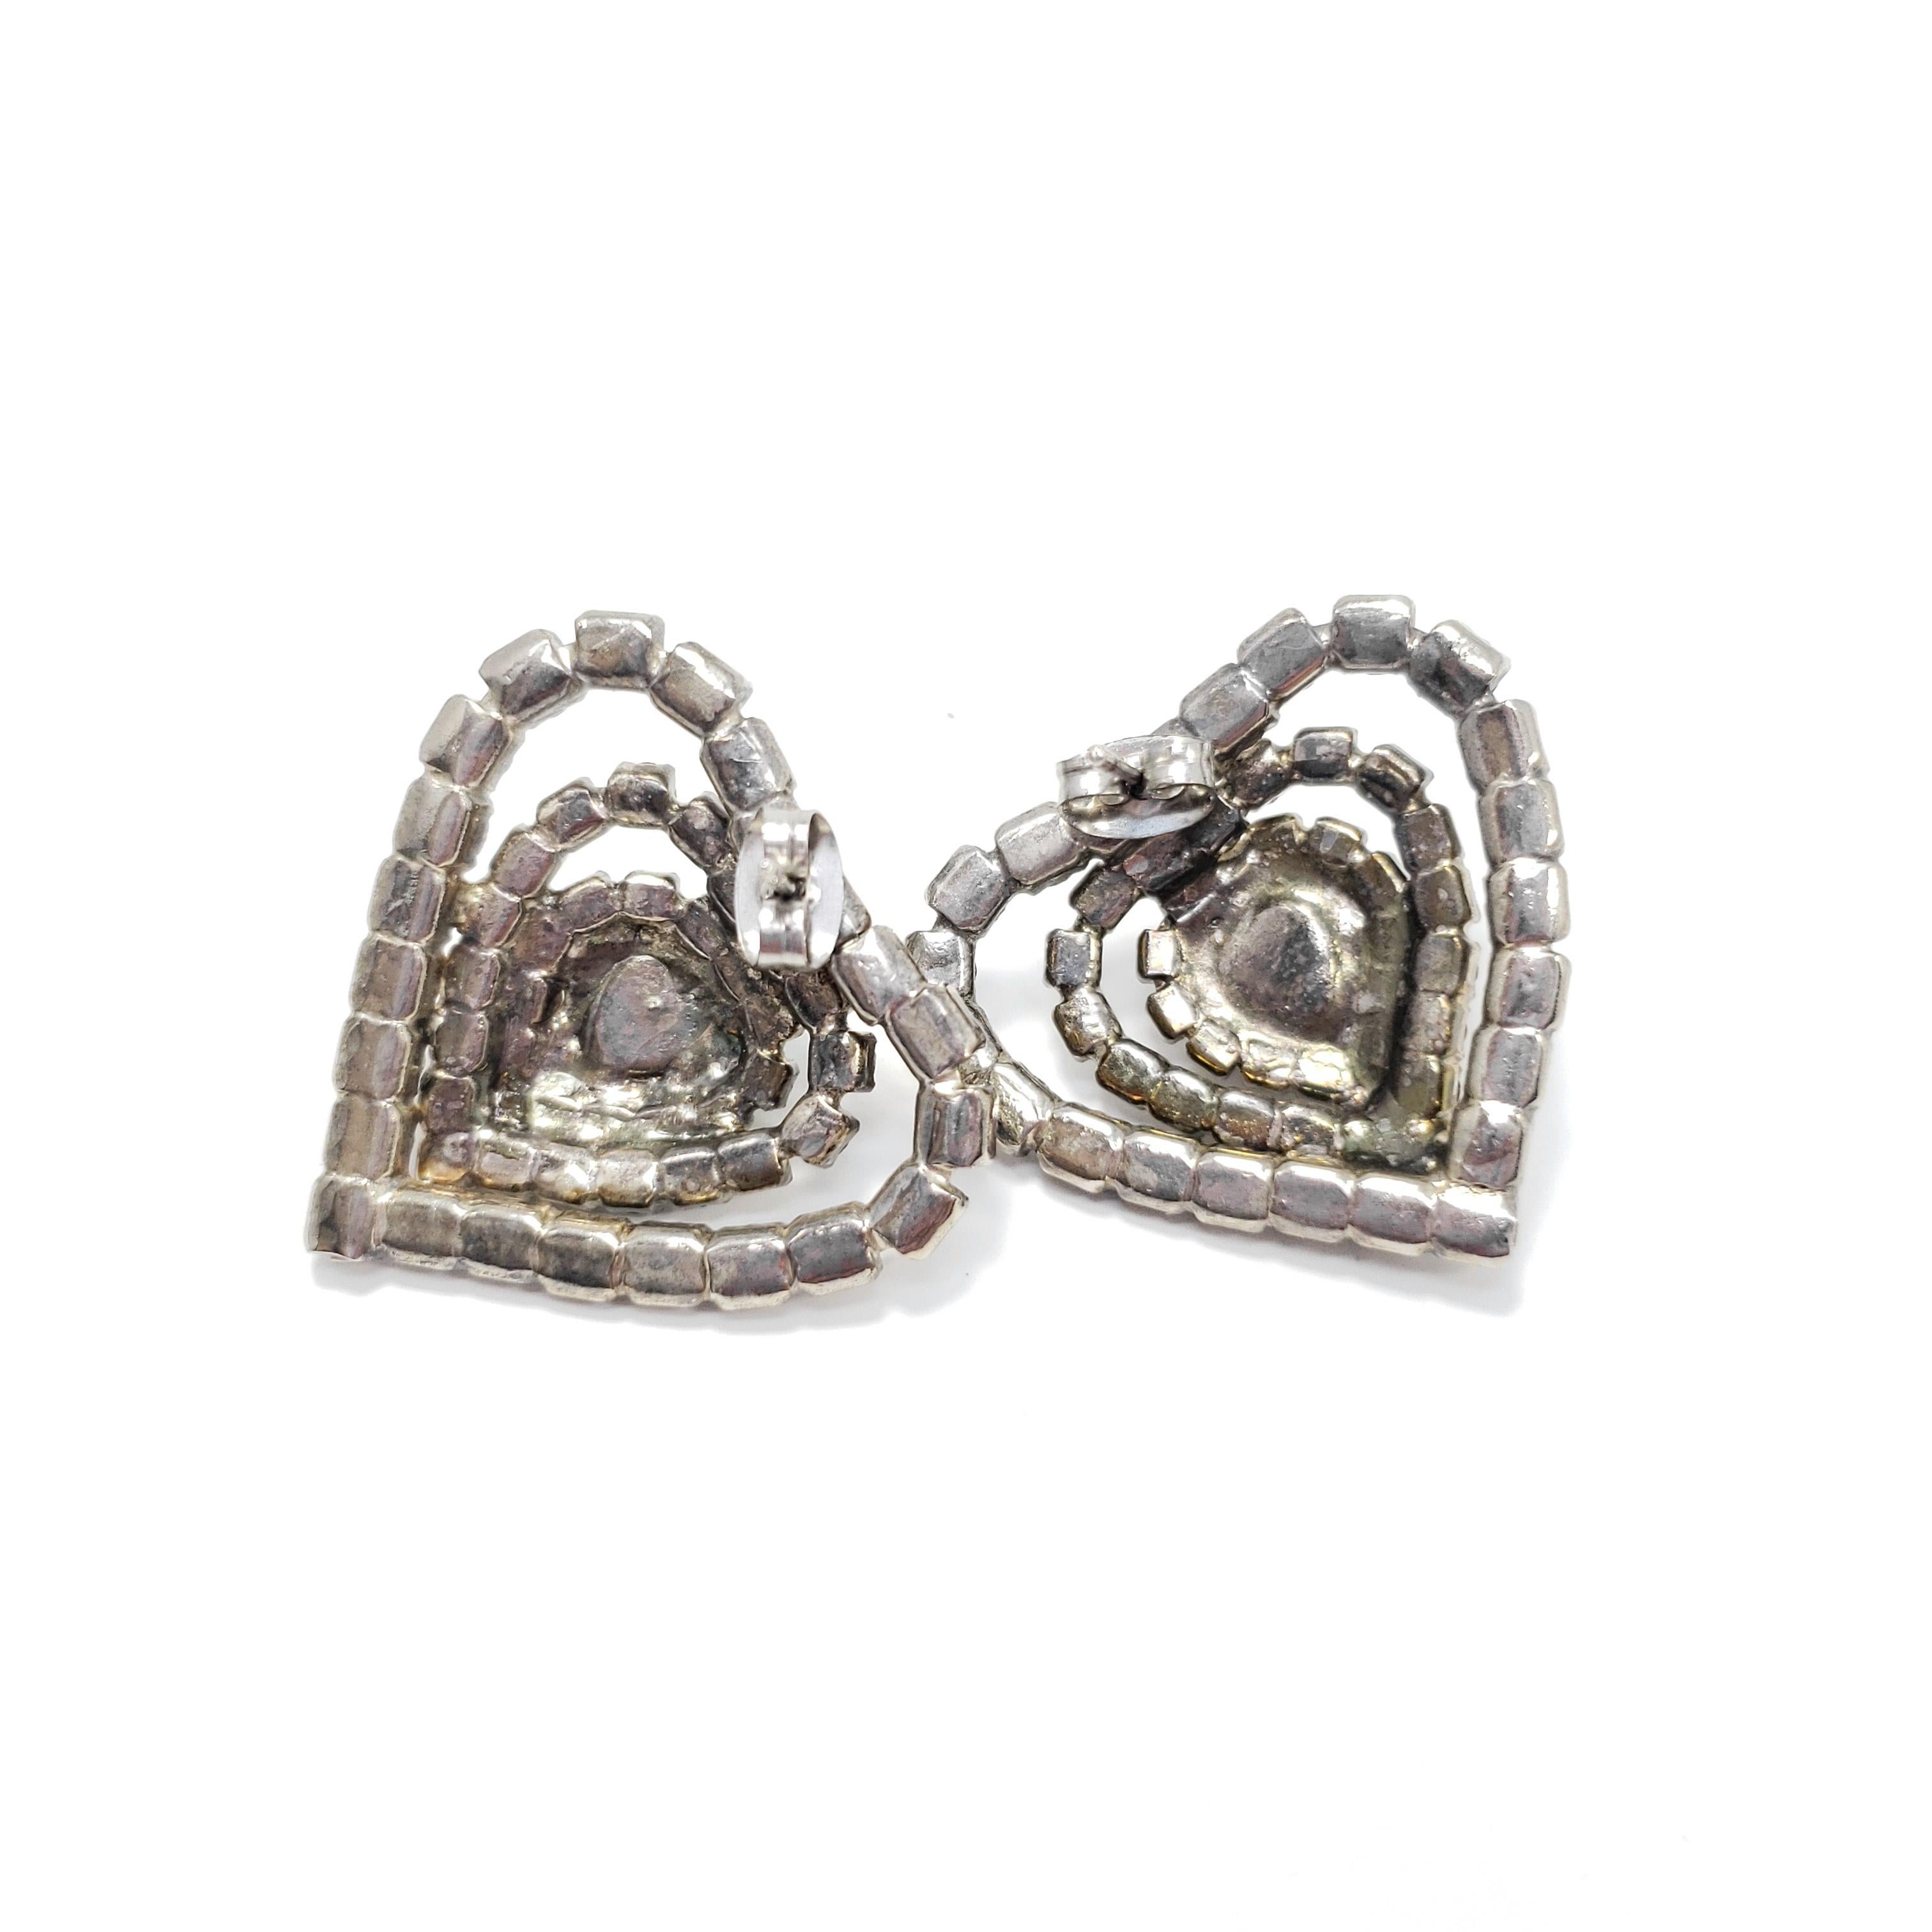 Vintage Crystal Heart Earrings, Post Backs, Mid 1900s In Good Condition For Sale In Milford, DE